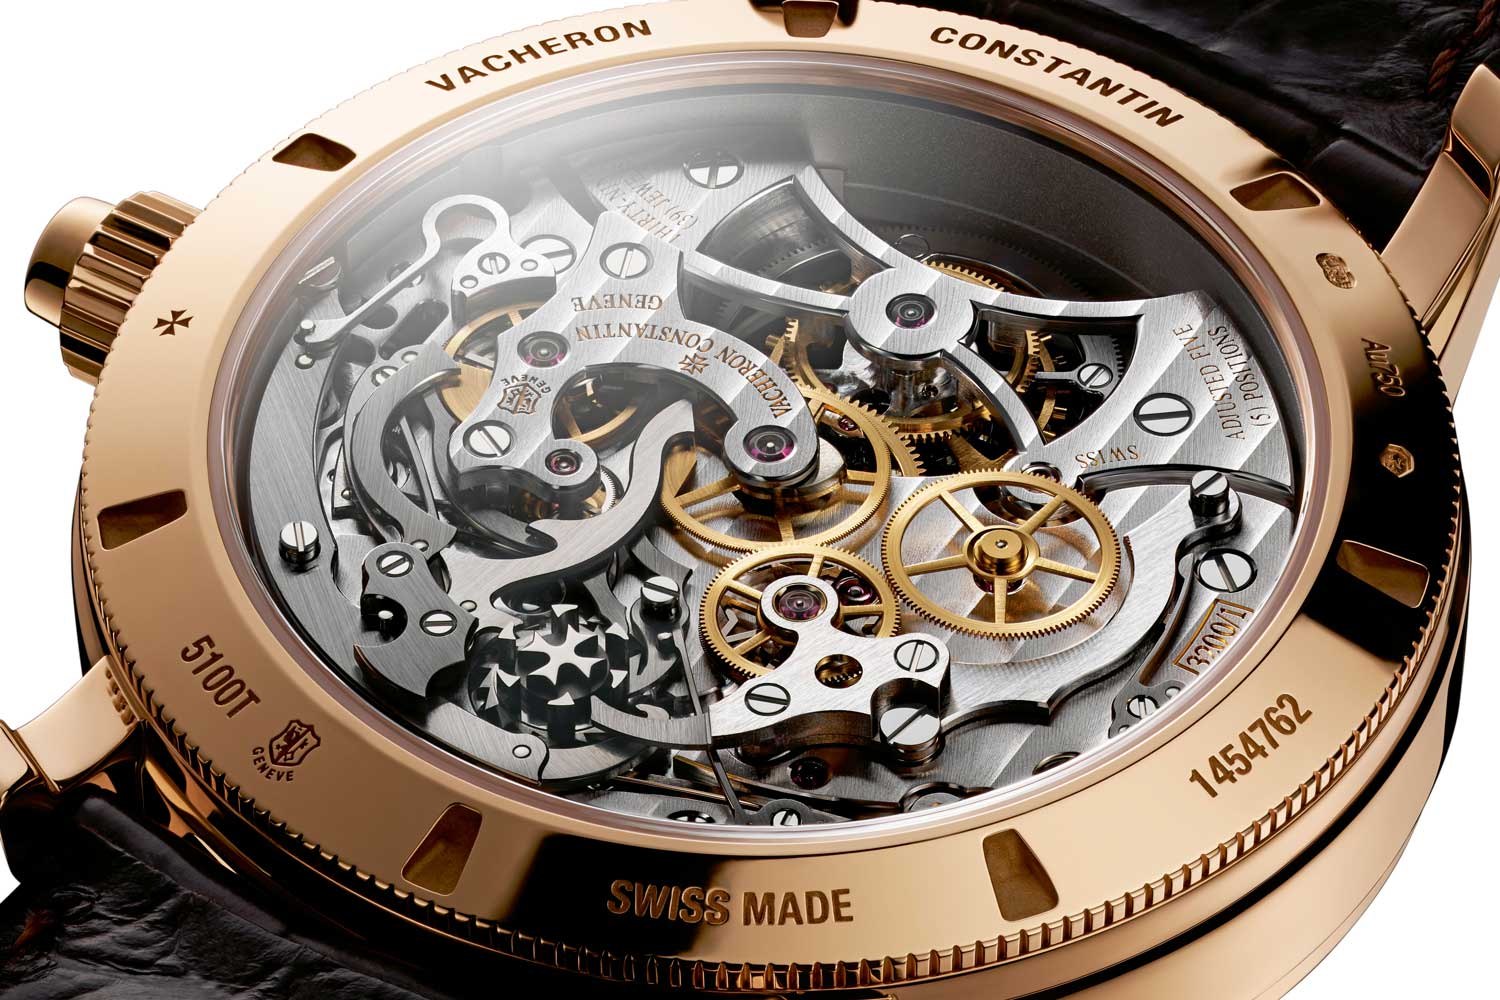 he Vacheron Constantin calibre 5100T and its horizontal coupling architecture. The drive, intermediate and chronograph wheels (shown approximately at the center of the image) are naturally highlighted due to their polished brass finishing.